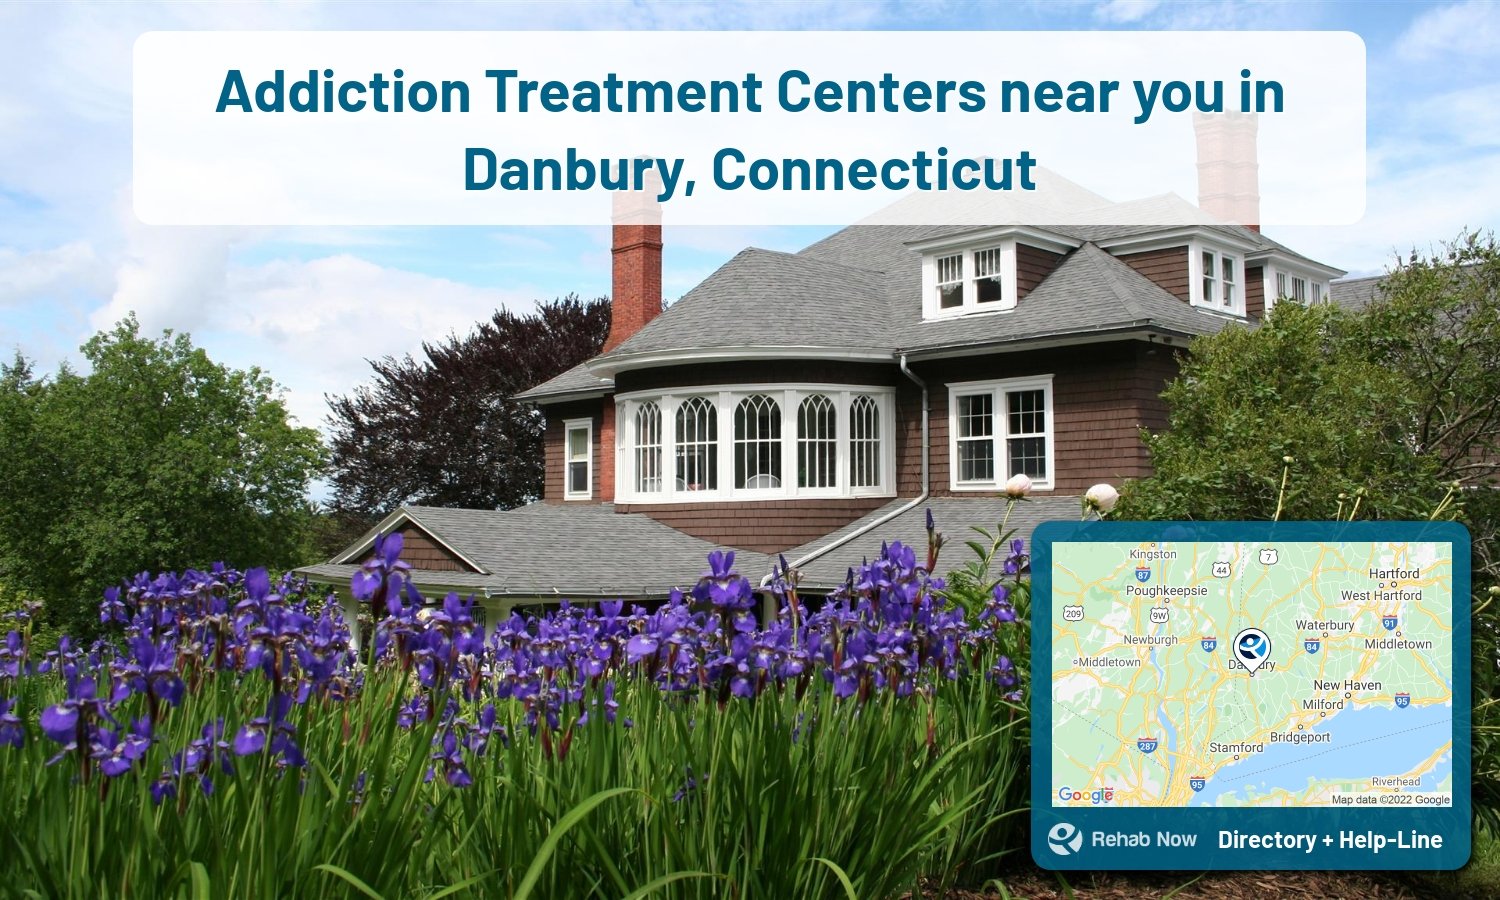 Danbury, CT Treatment Centers. Find drug rehab in Danbury, Connecticut, or detox and treatment programs. Get the right help now!